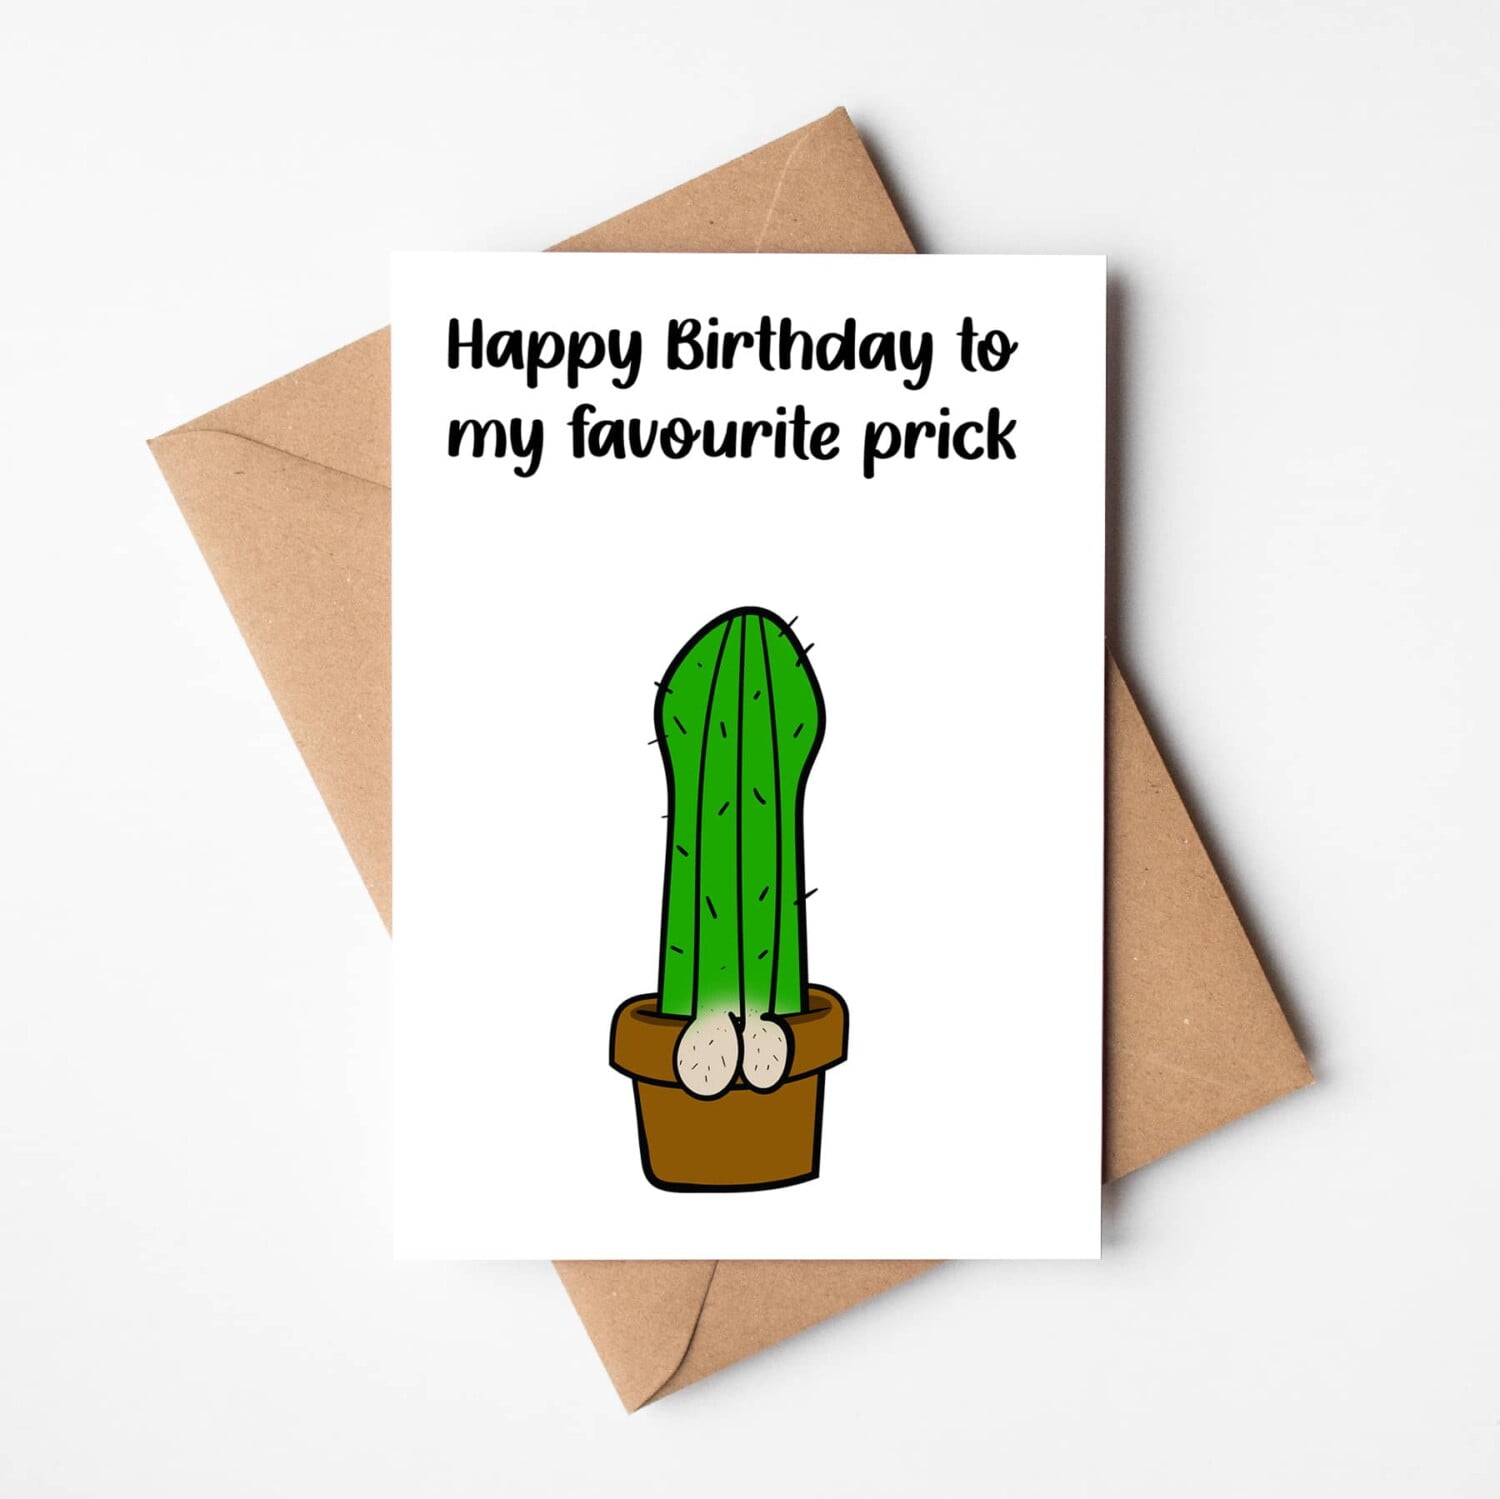 Happy Birthday to my favourite prick birthday card, Printing in County Monaghan, Ireland by Design Gaff